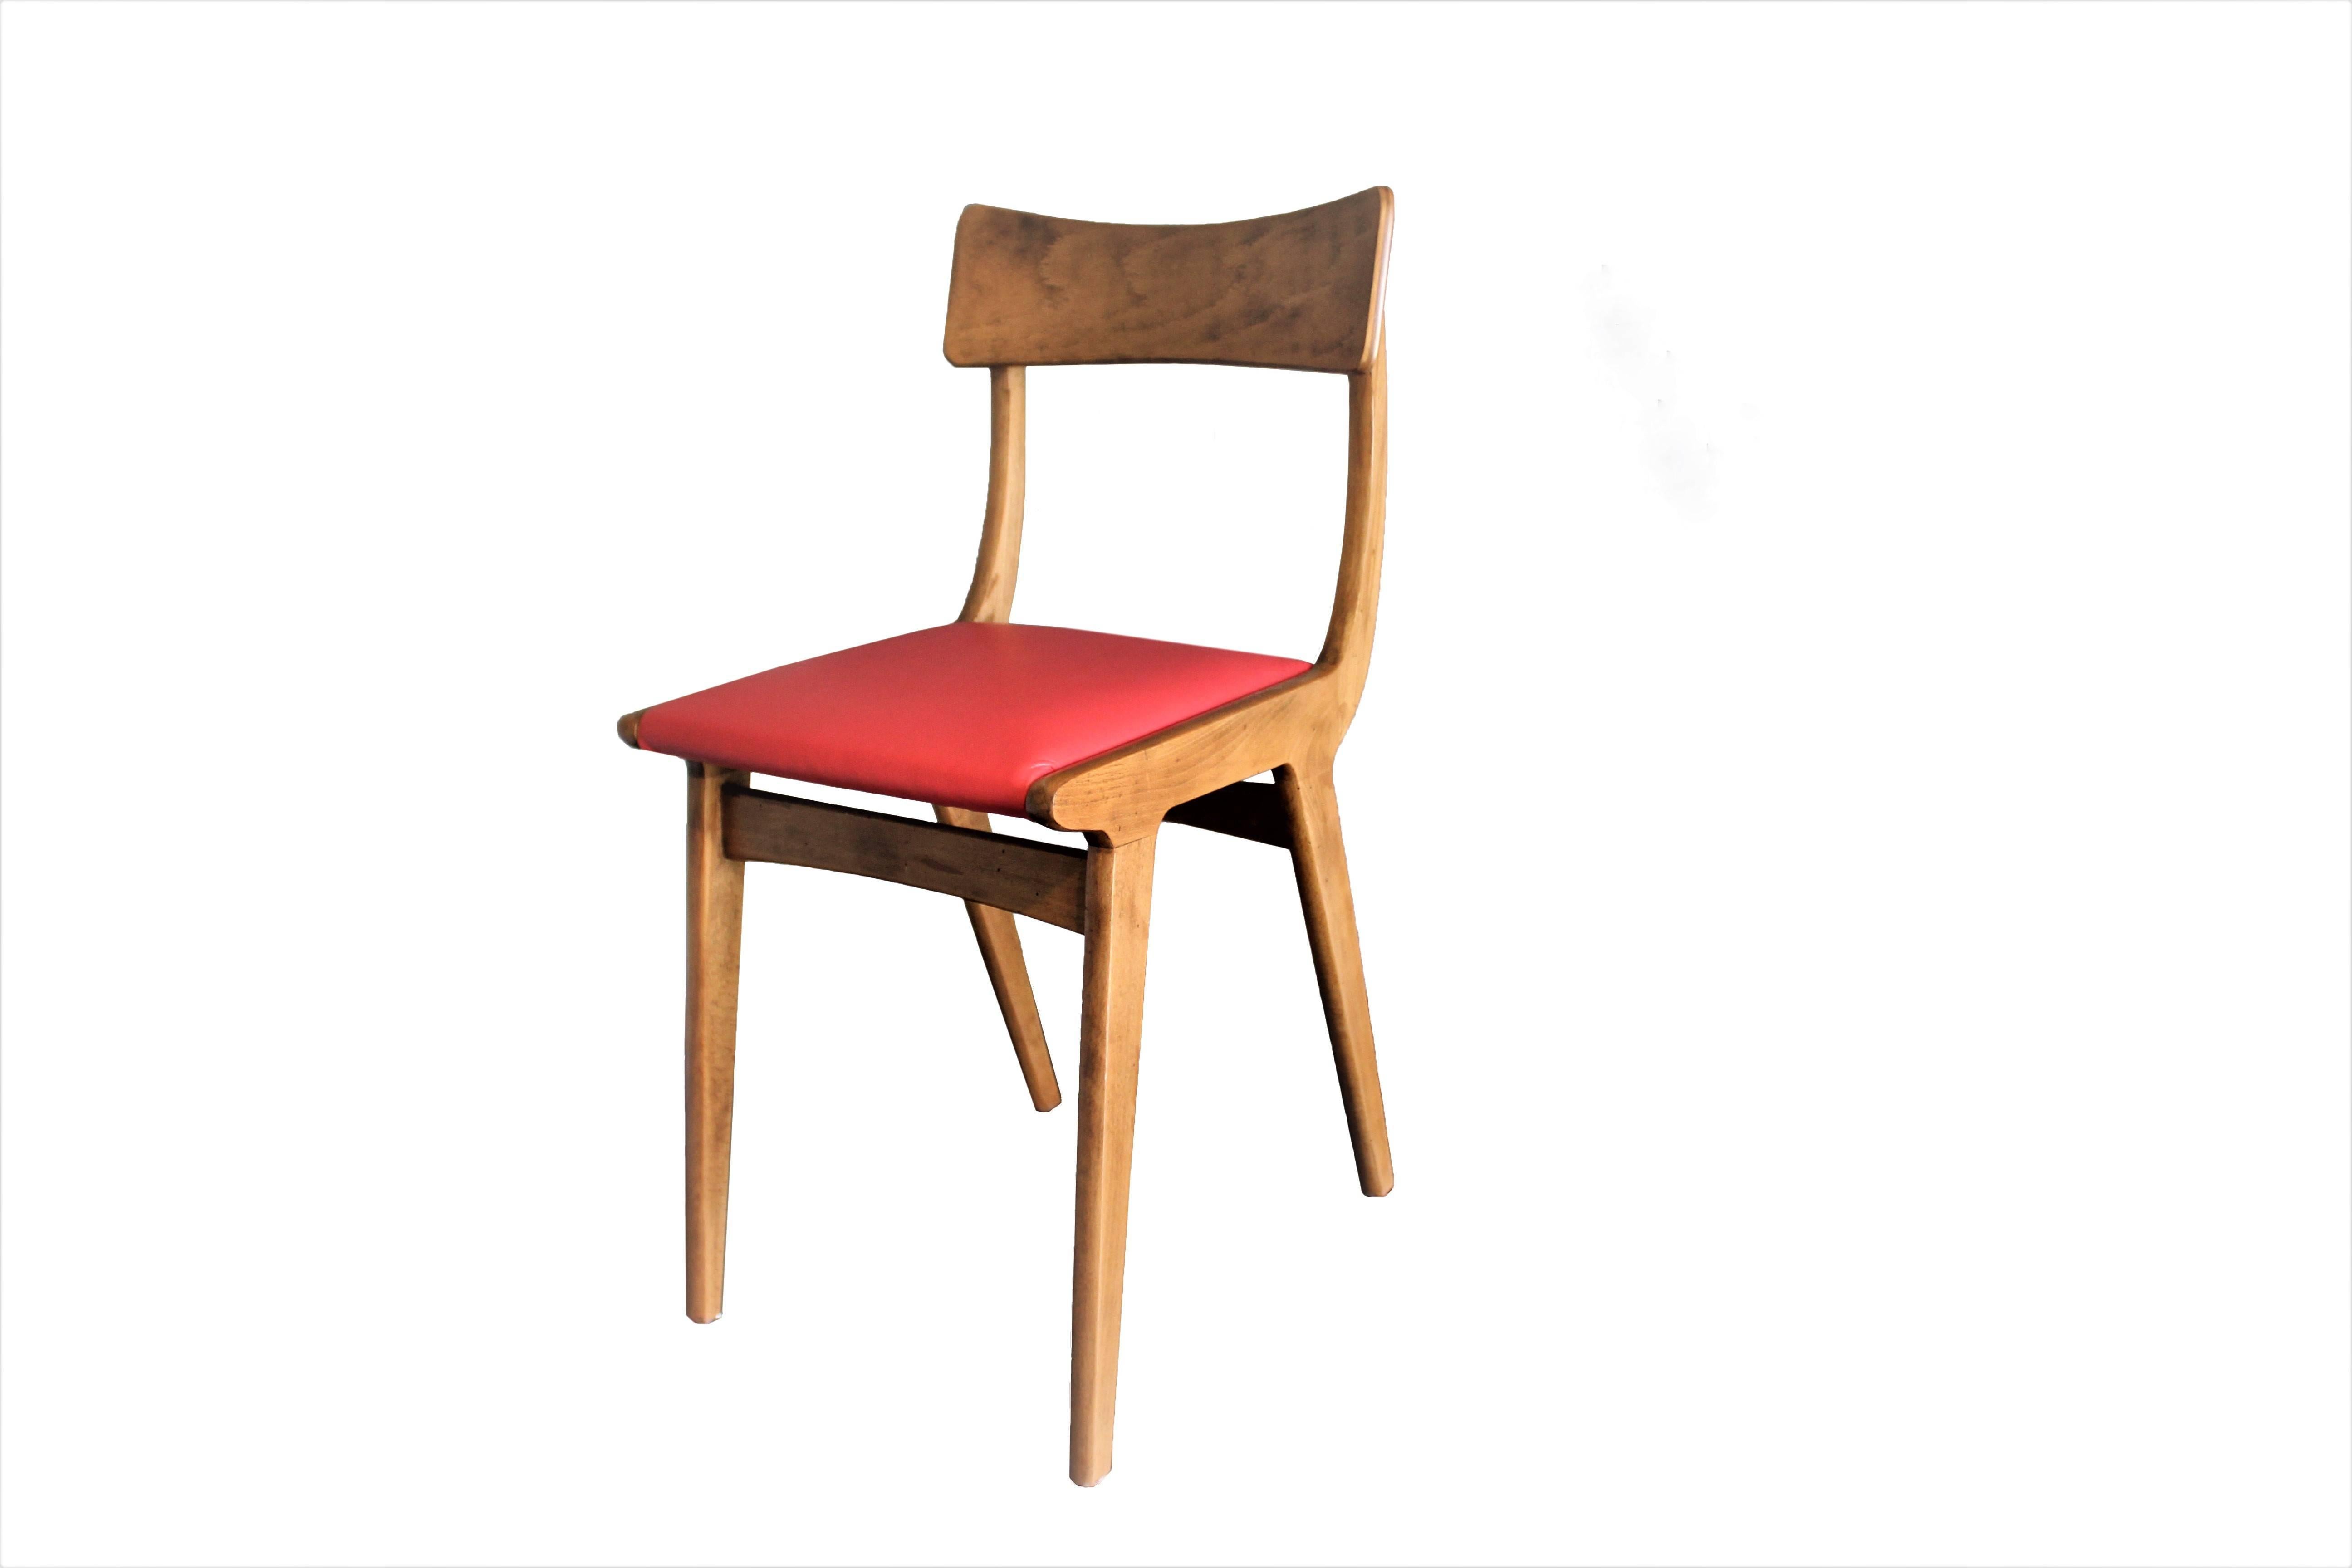 Set of two wood chairs, the cushion is restored in red leather.
Made in Italy, circa 1950.